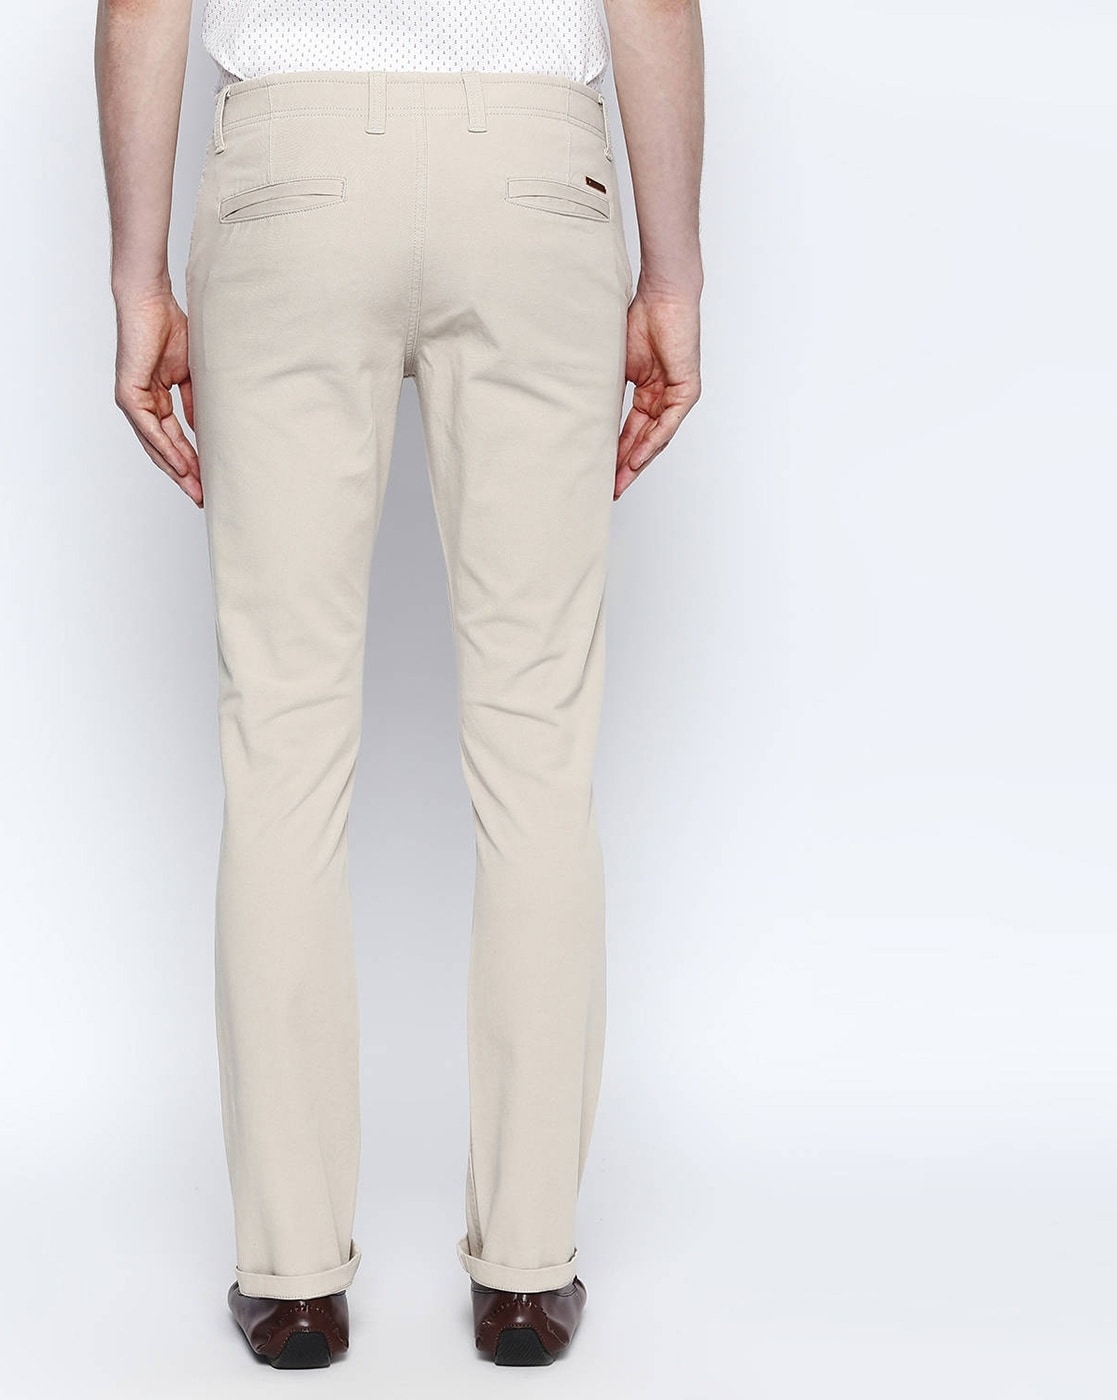 Scullers cotton pant